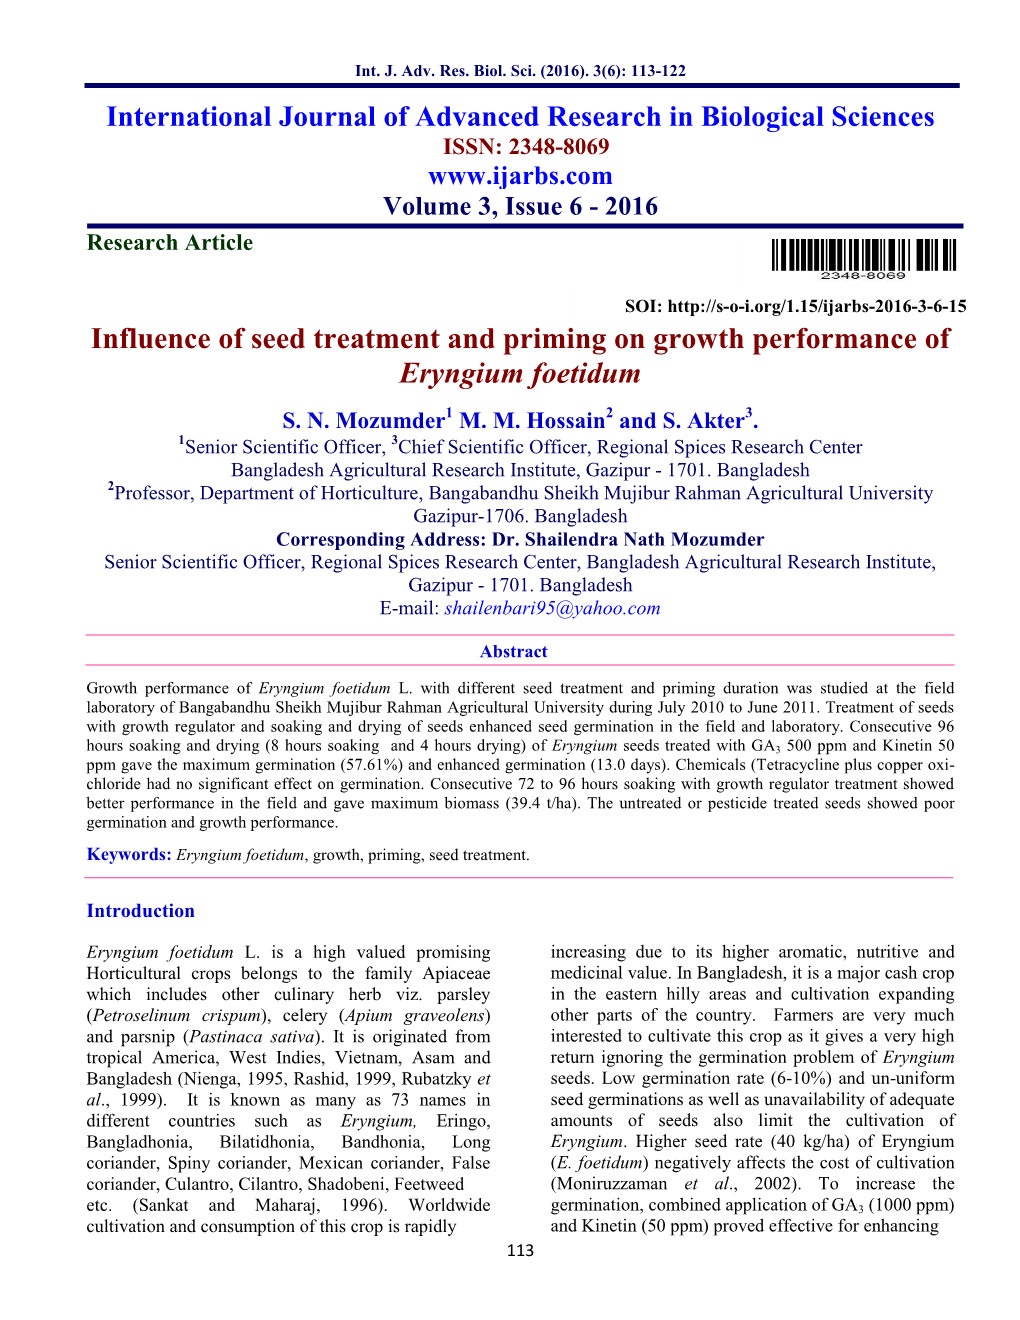 Influence of Seed Treatment and Priming on Growth Performance of Eryngium Foetidum S